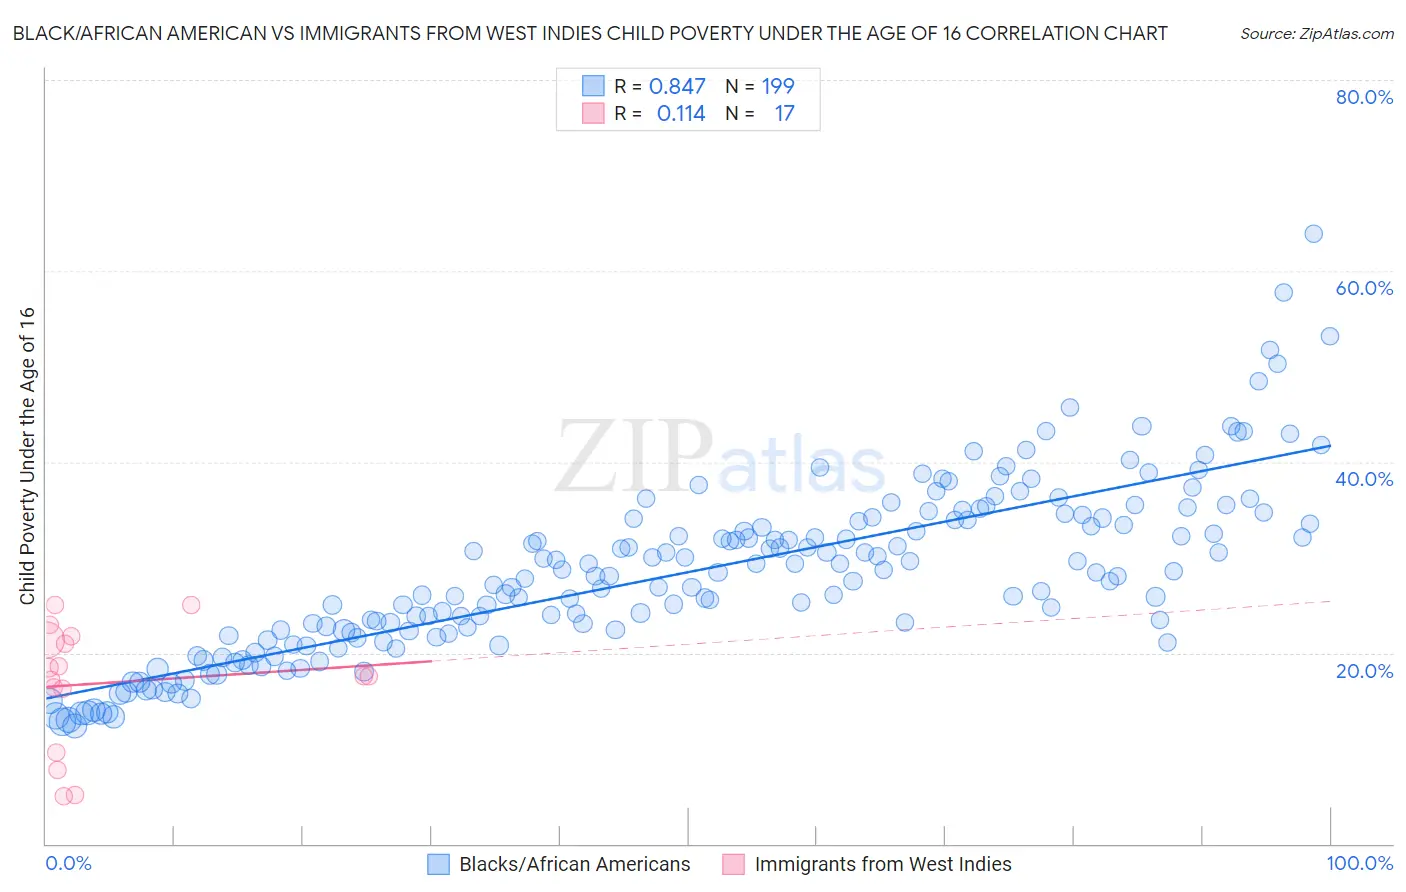 Black/African American vs Immigrants from West Indies Child Poverty Under the Age of 16